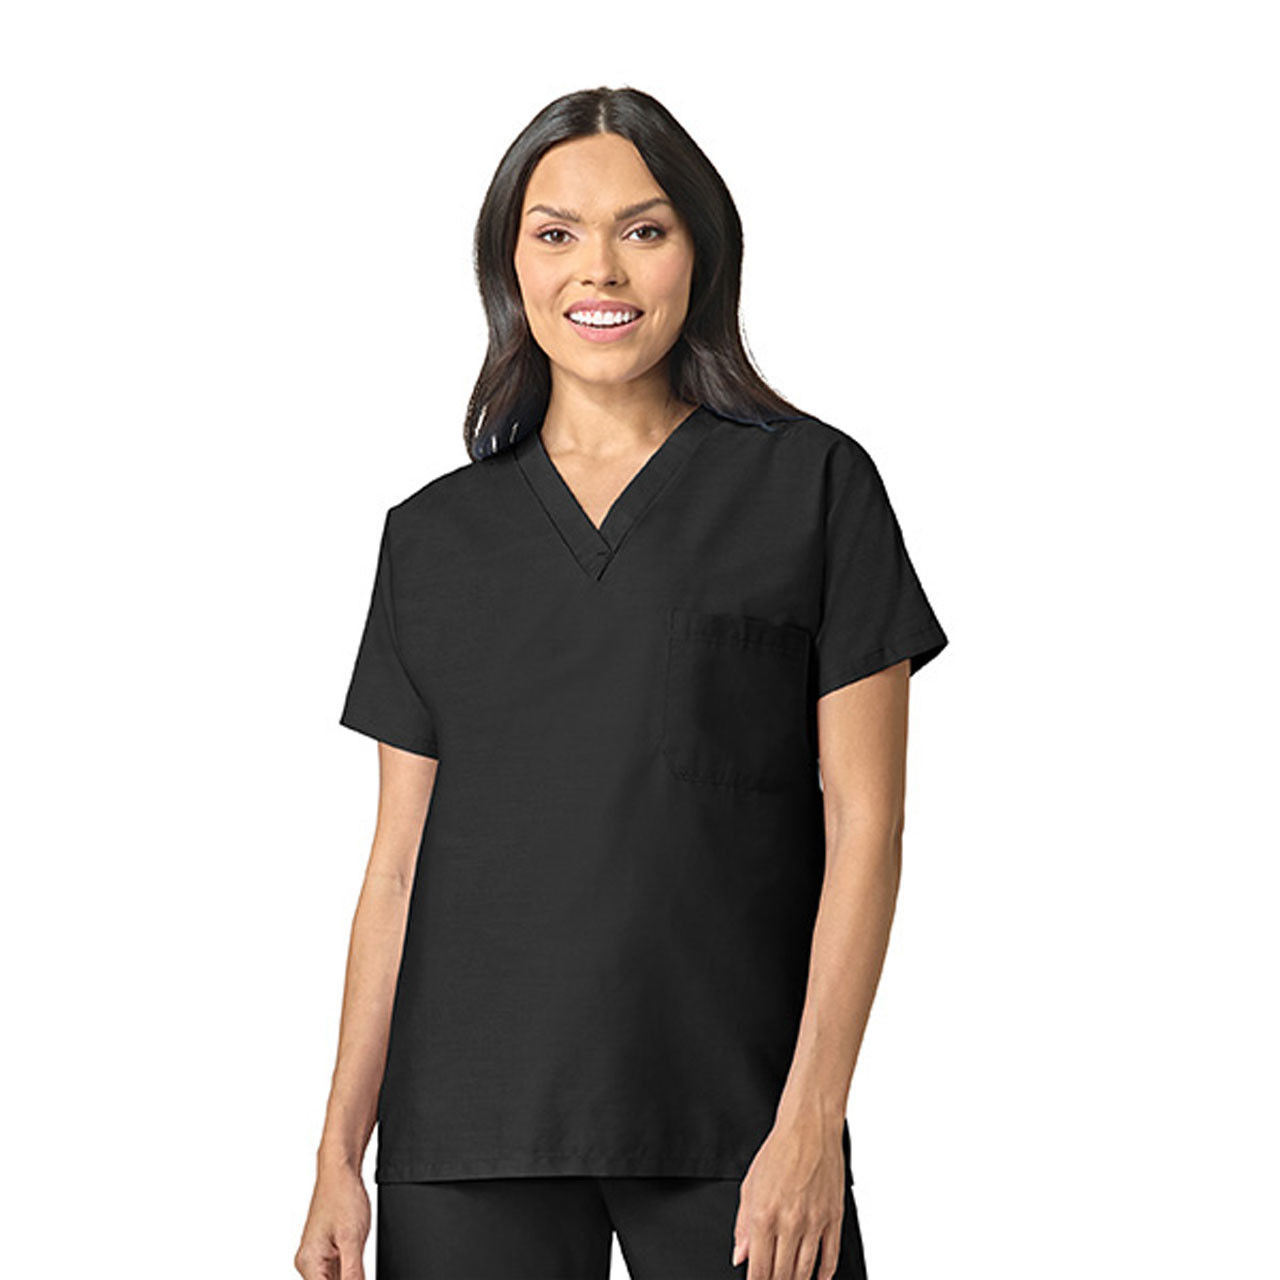 Can I purchase Black Scrub Tops in smaller quantities?